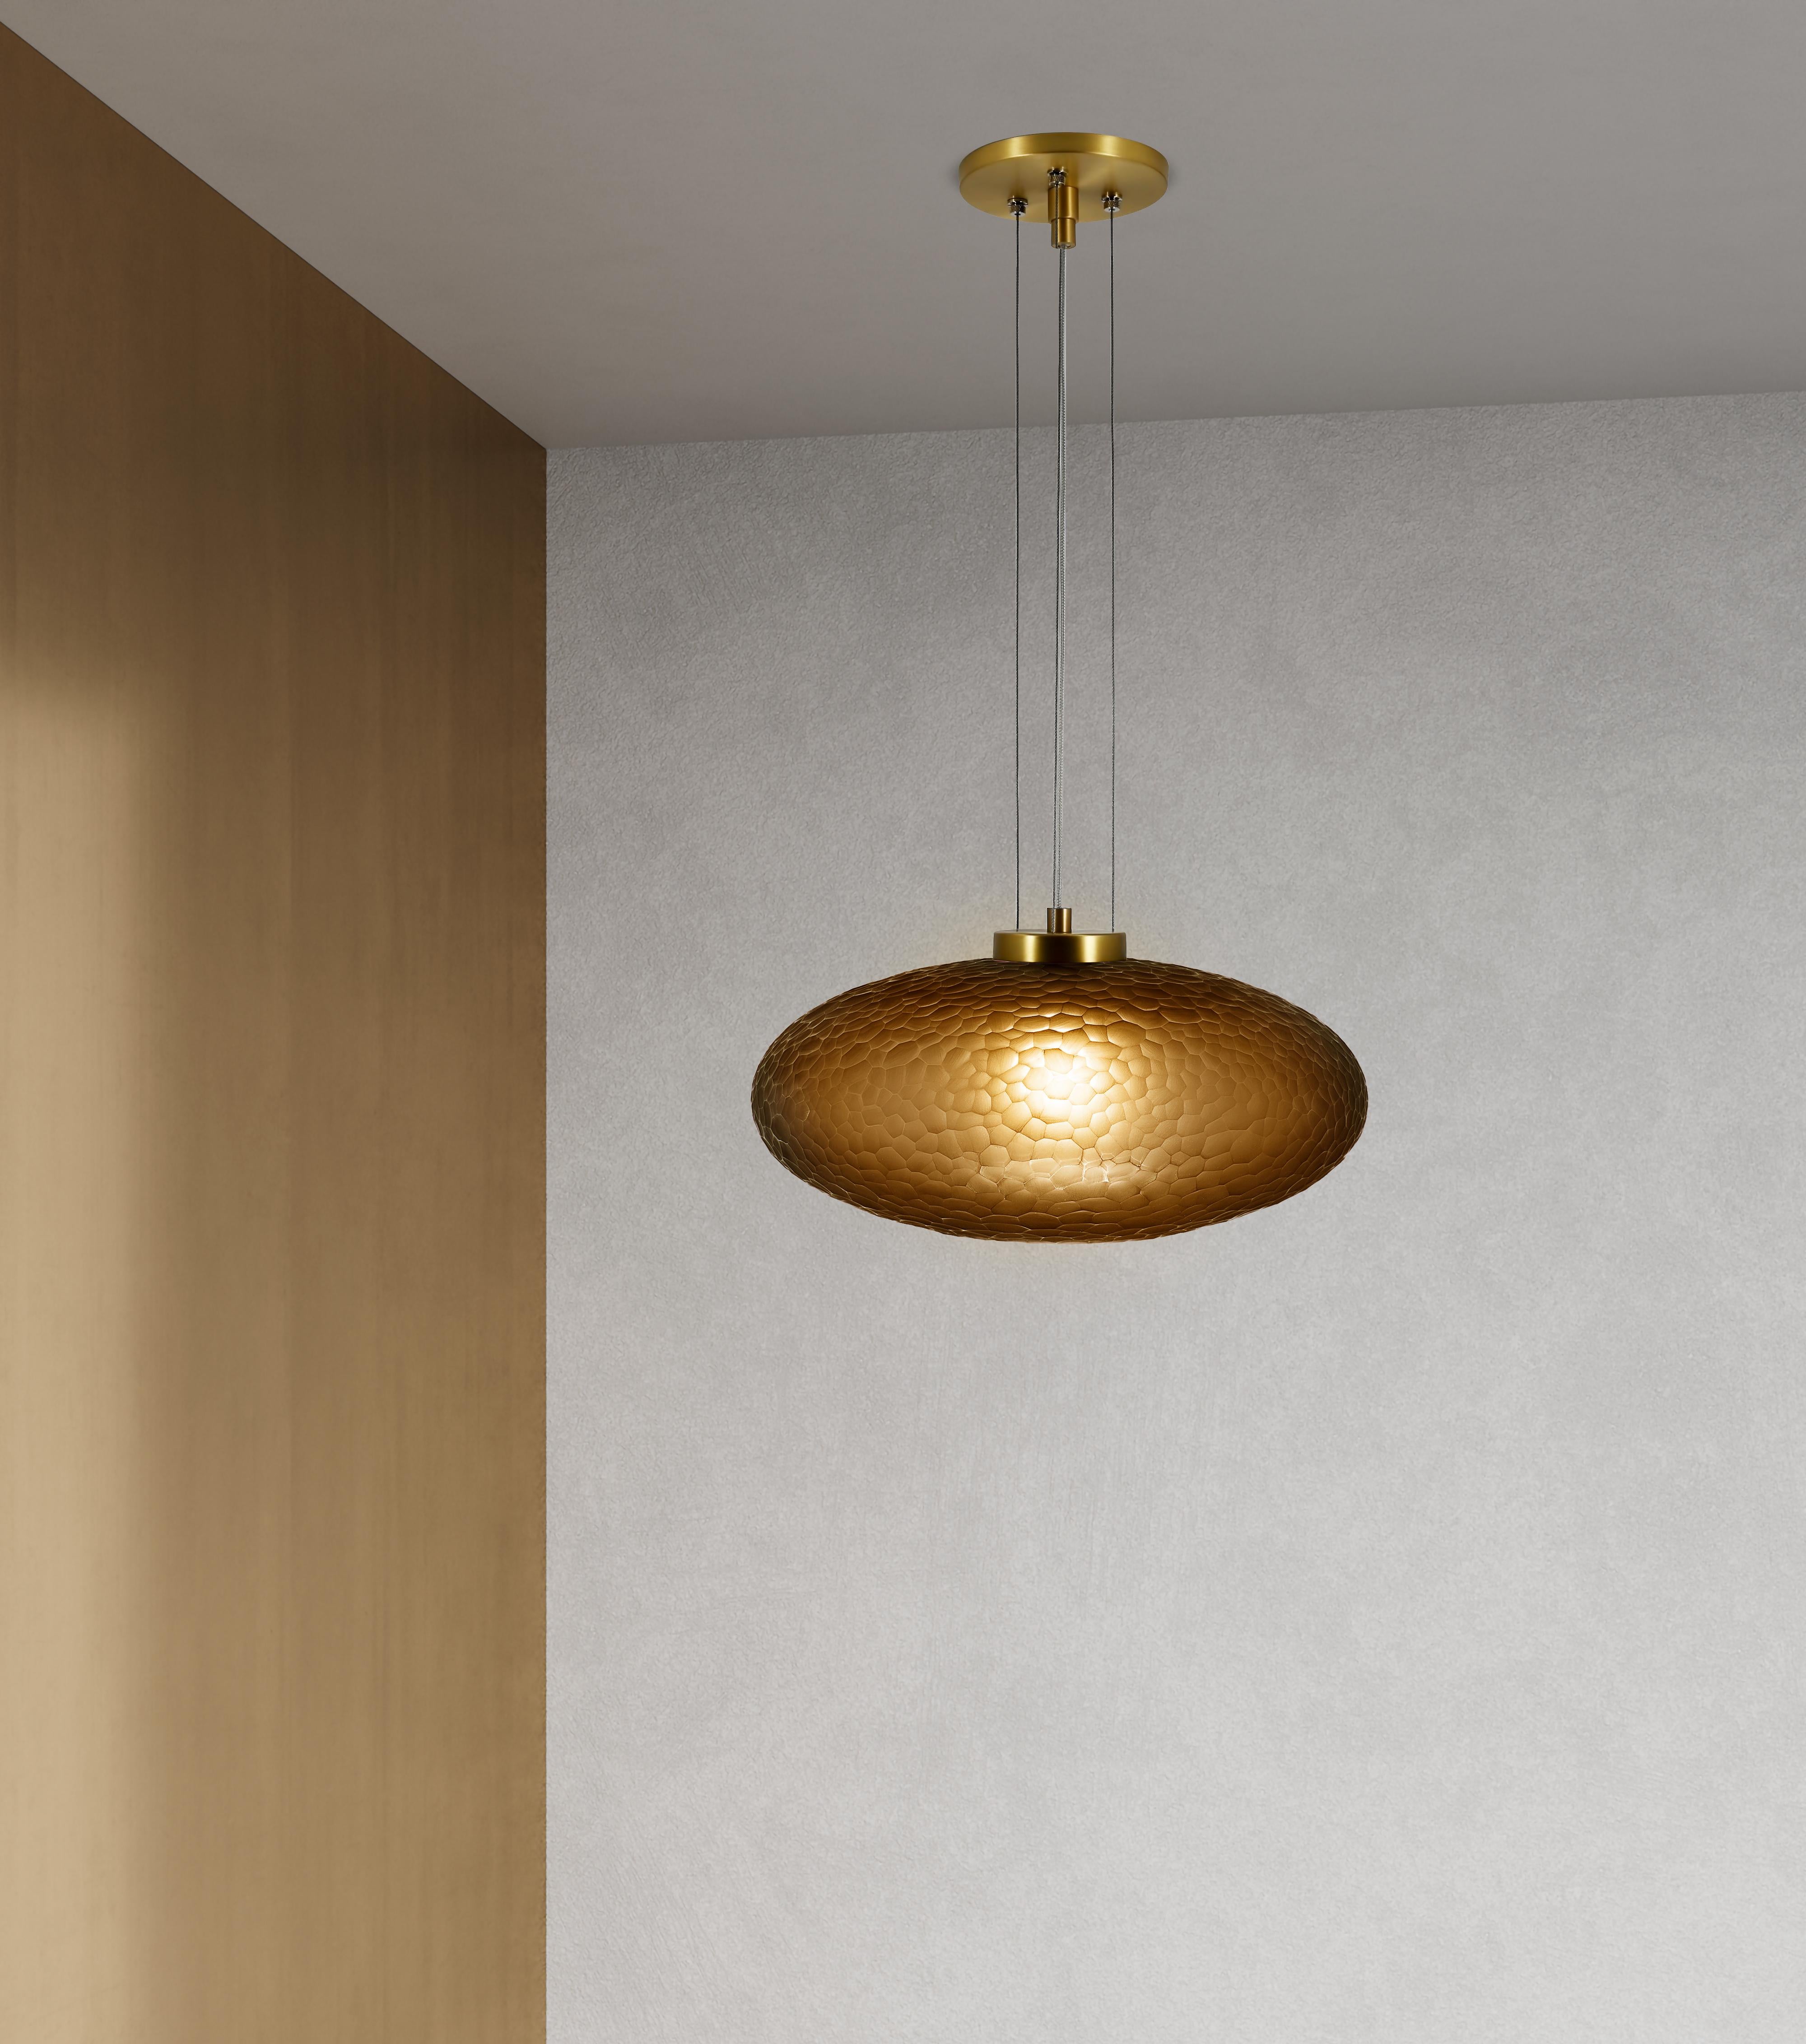 Inspired by the 70s Avant-Garde aesthetic, the Lennox’s hand-carved Battuto finish lends an elevated ambiance to its retro, oval silhouette. Whether as a pendant or sconce, the special glow of the Lennox glass stands out with a brilliant halo